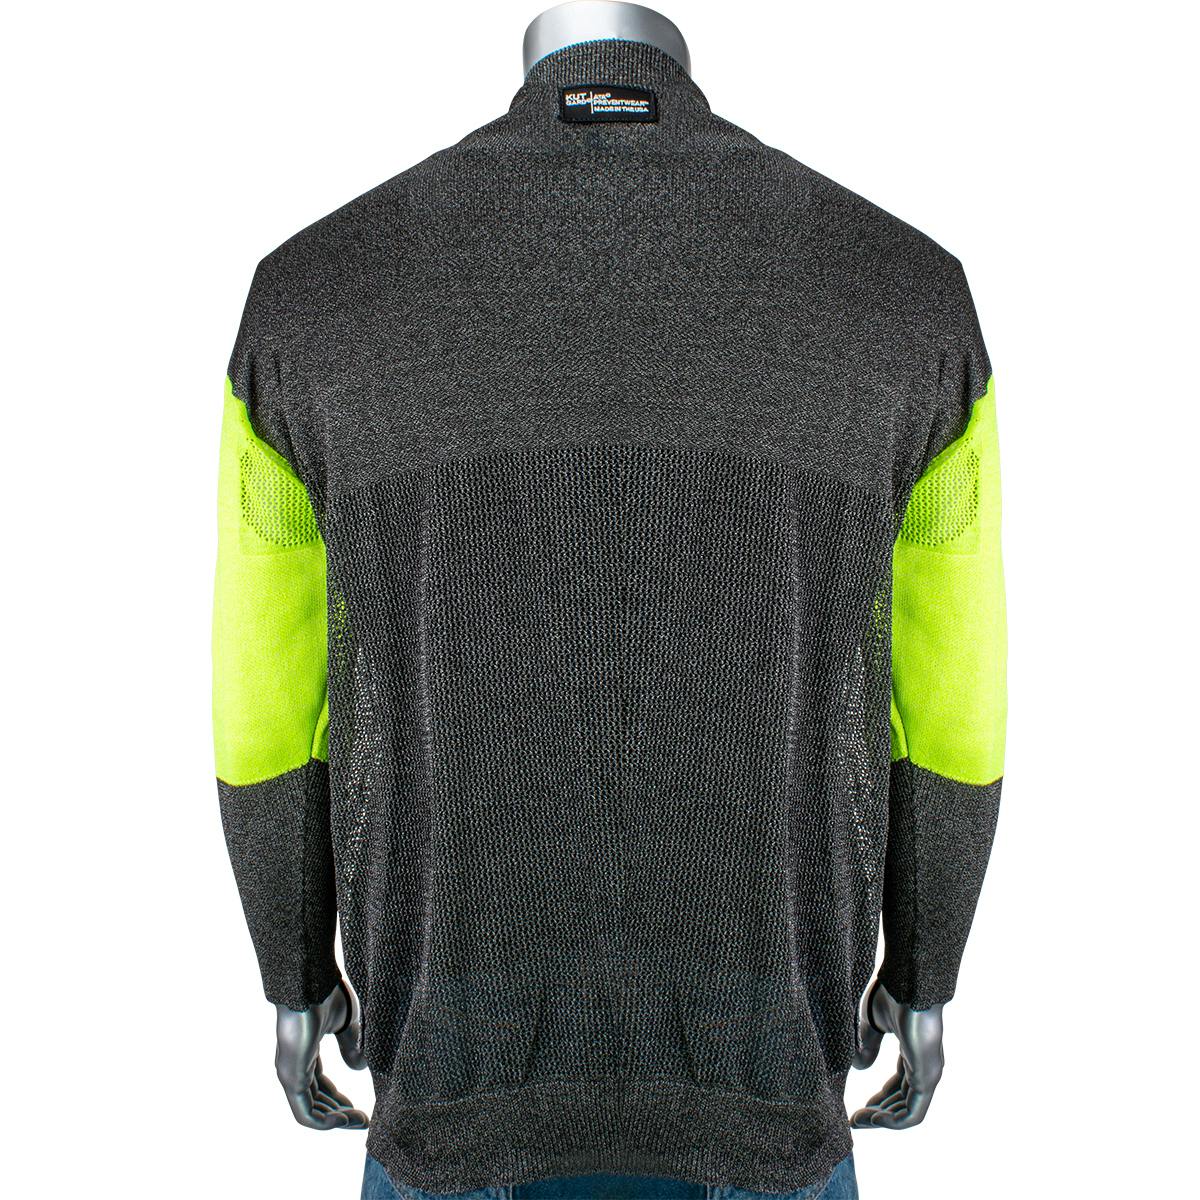 ATA® Blended Cut Resistant Pullover with Removable Belly Patch, Hi-Vis Sleeves and Thumb Loops, Dark Gray (P190BP-PP1-TL)